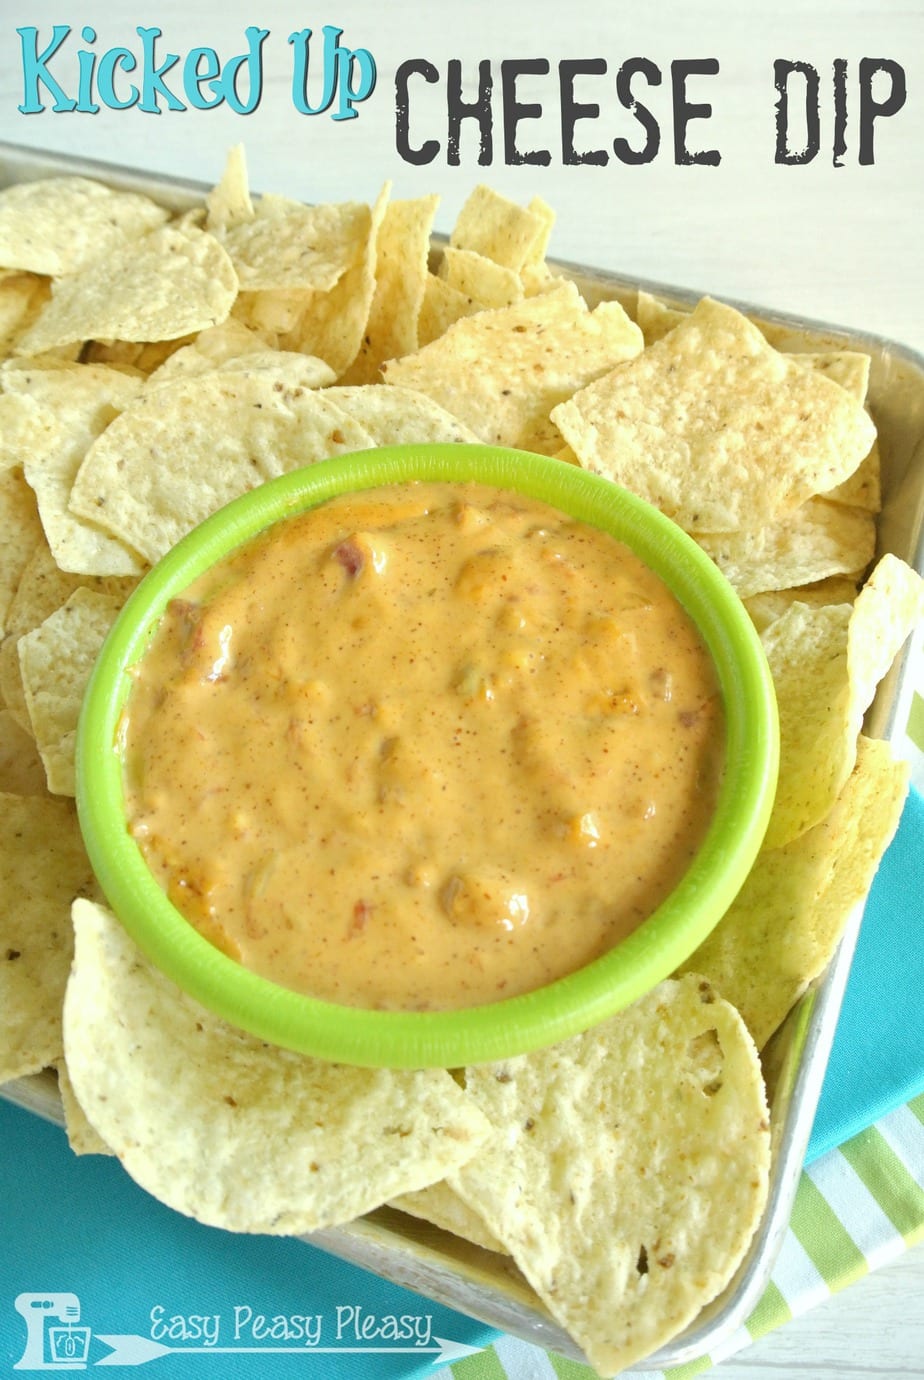 This ain't your momma's boring old cheese dip. Try this Kicked Up Crockpot Velveeta Cheese Dip. It will change your life.